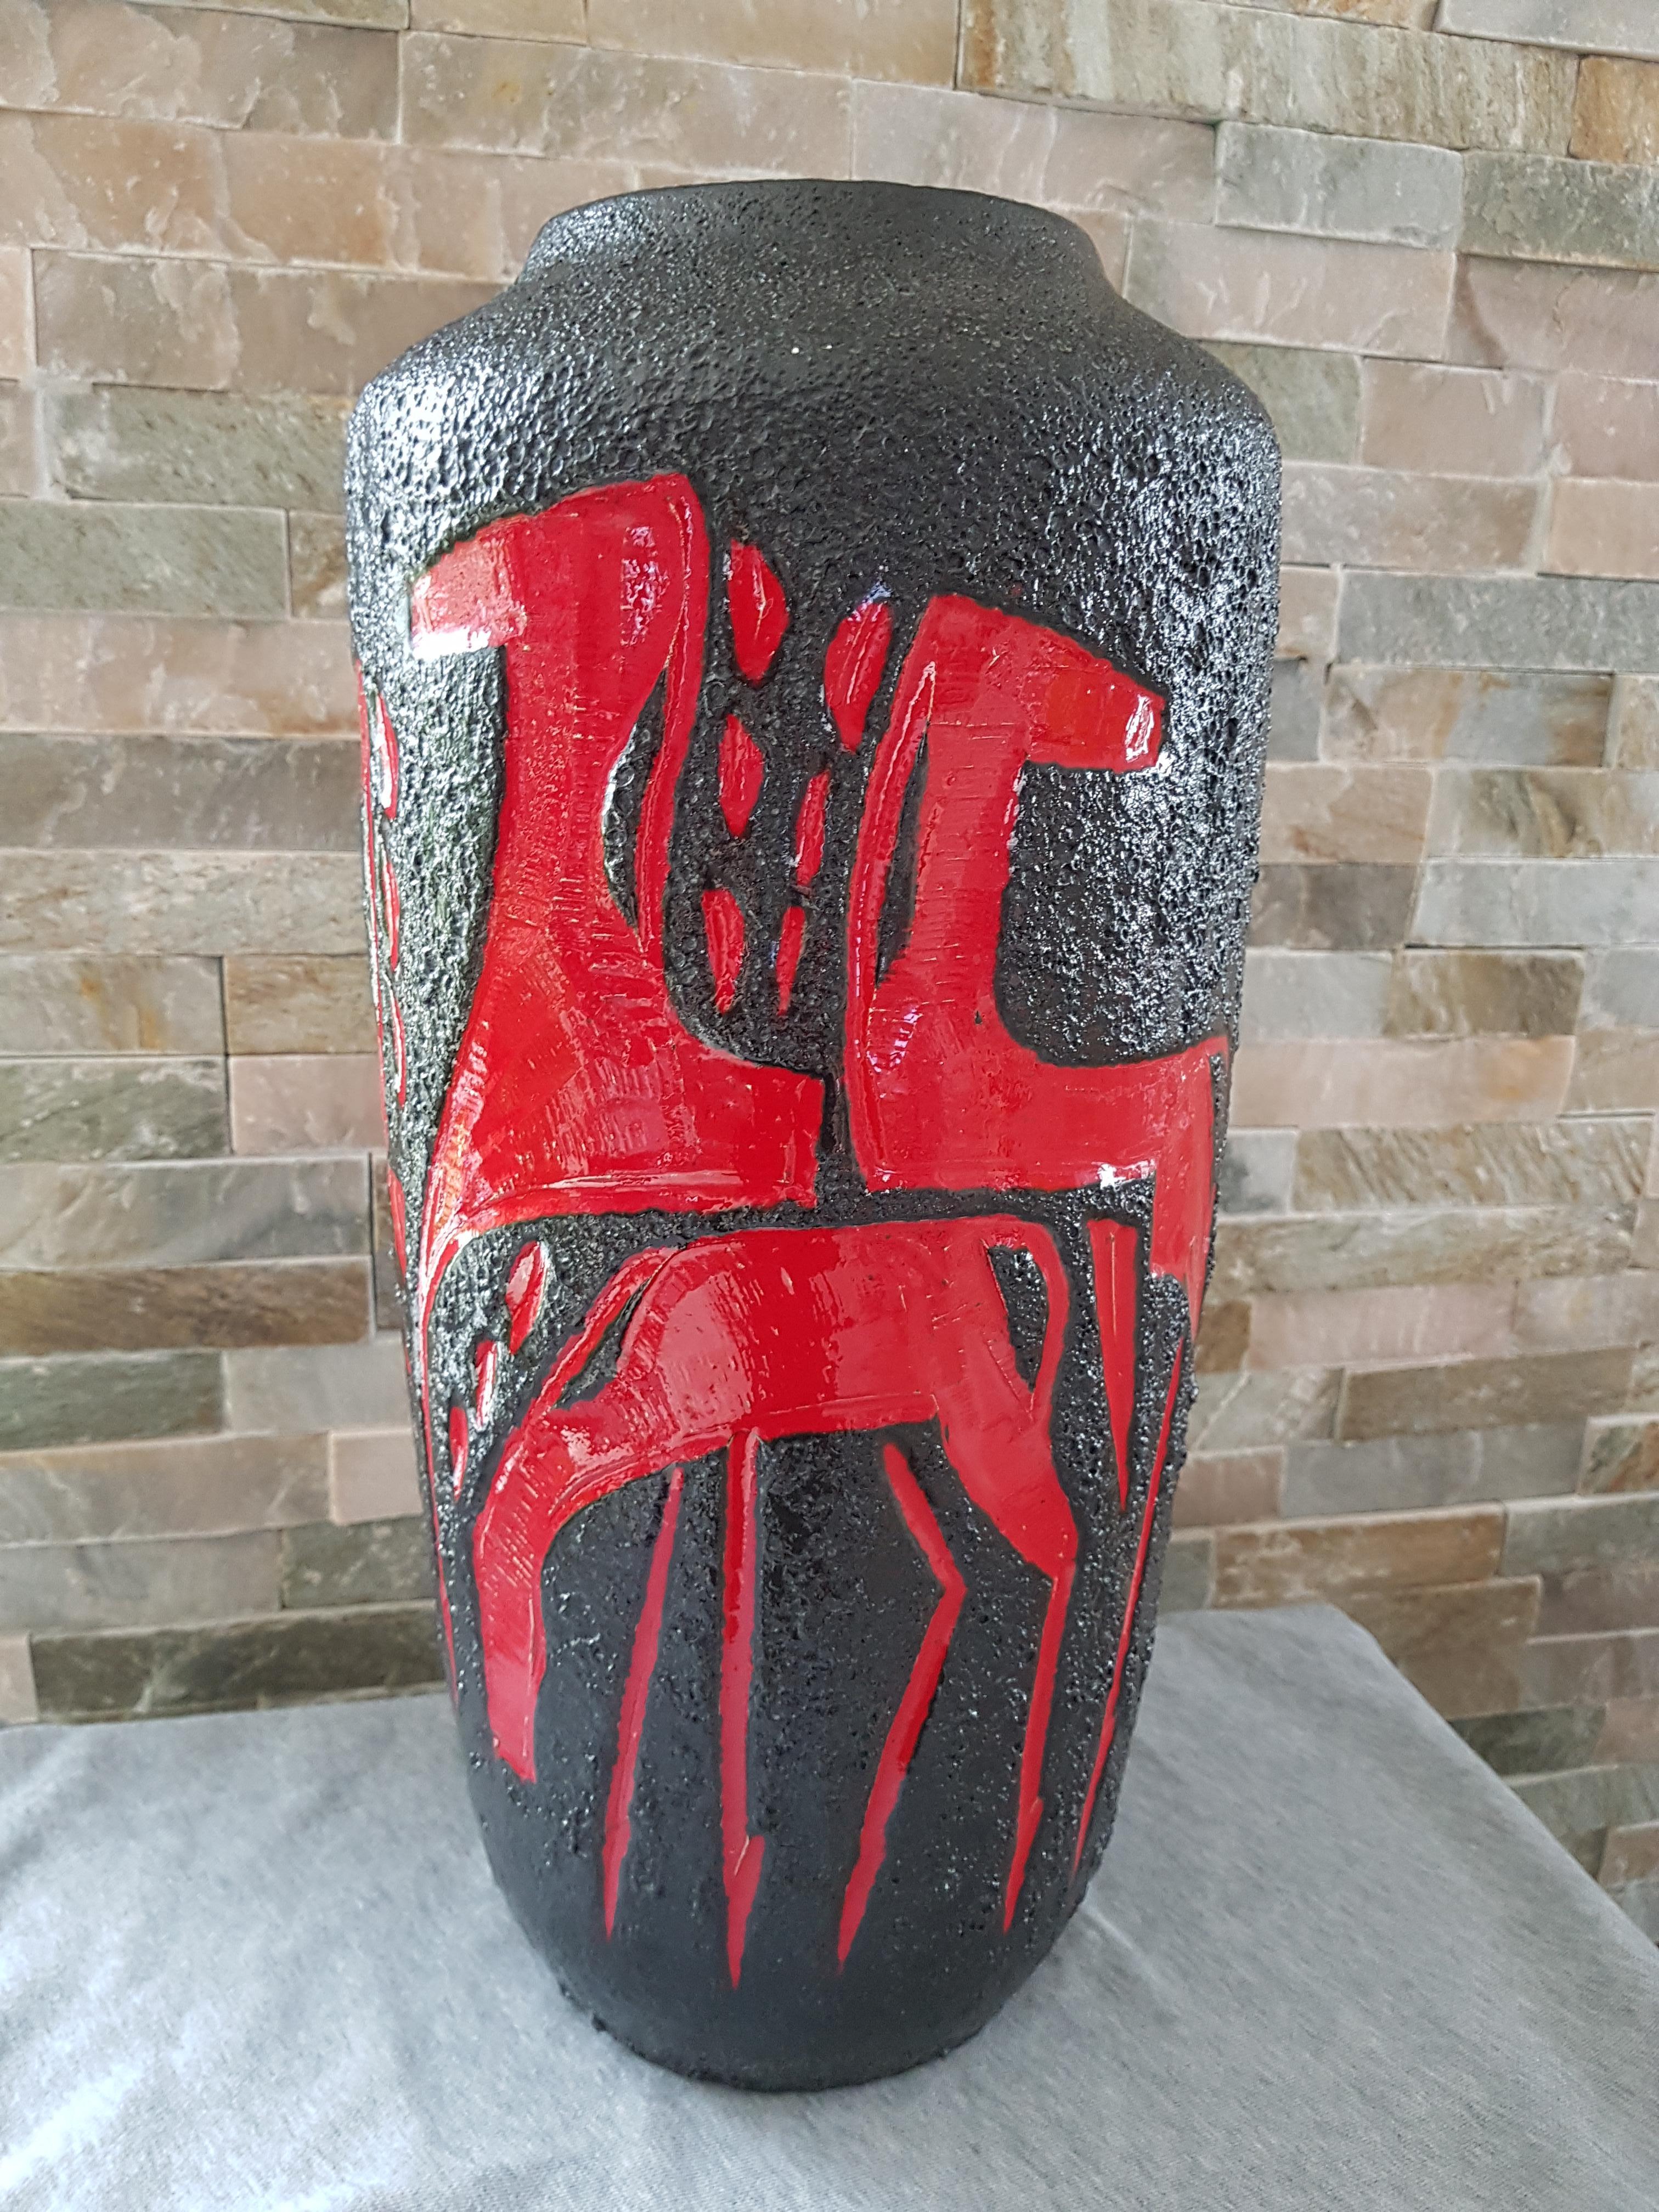 Midcentury fat lava vase from Scheurich, Germany, 1960s. perfect vintage condition.

Manufactured by Scheurich, one of the most famous fat lava companies of Germany.

